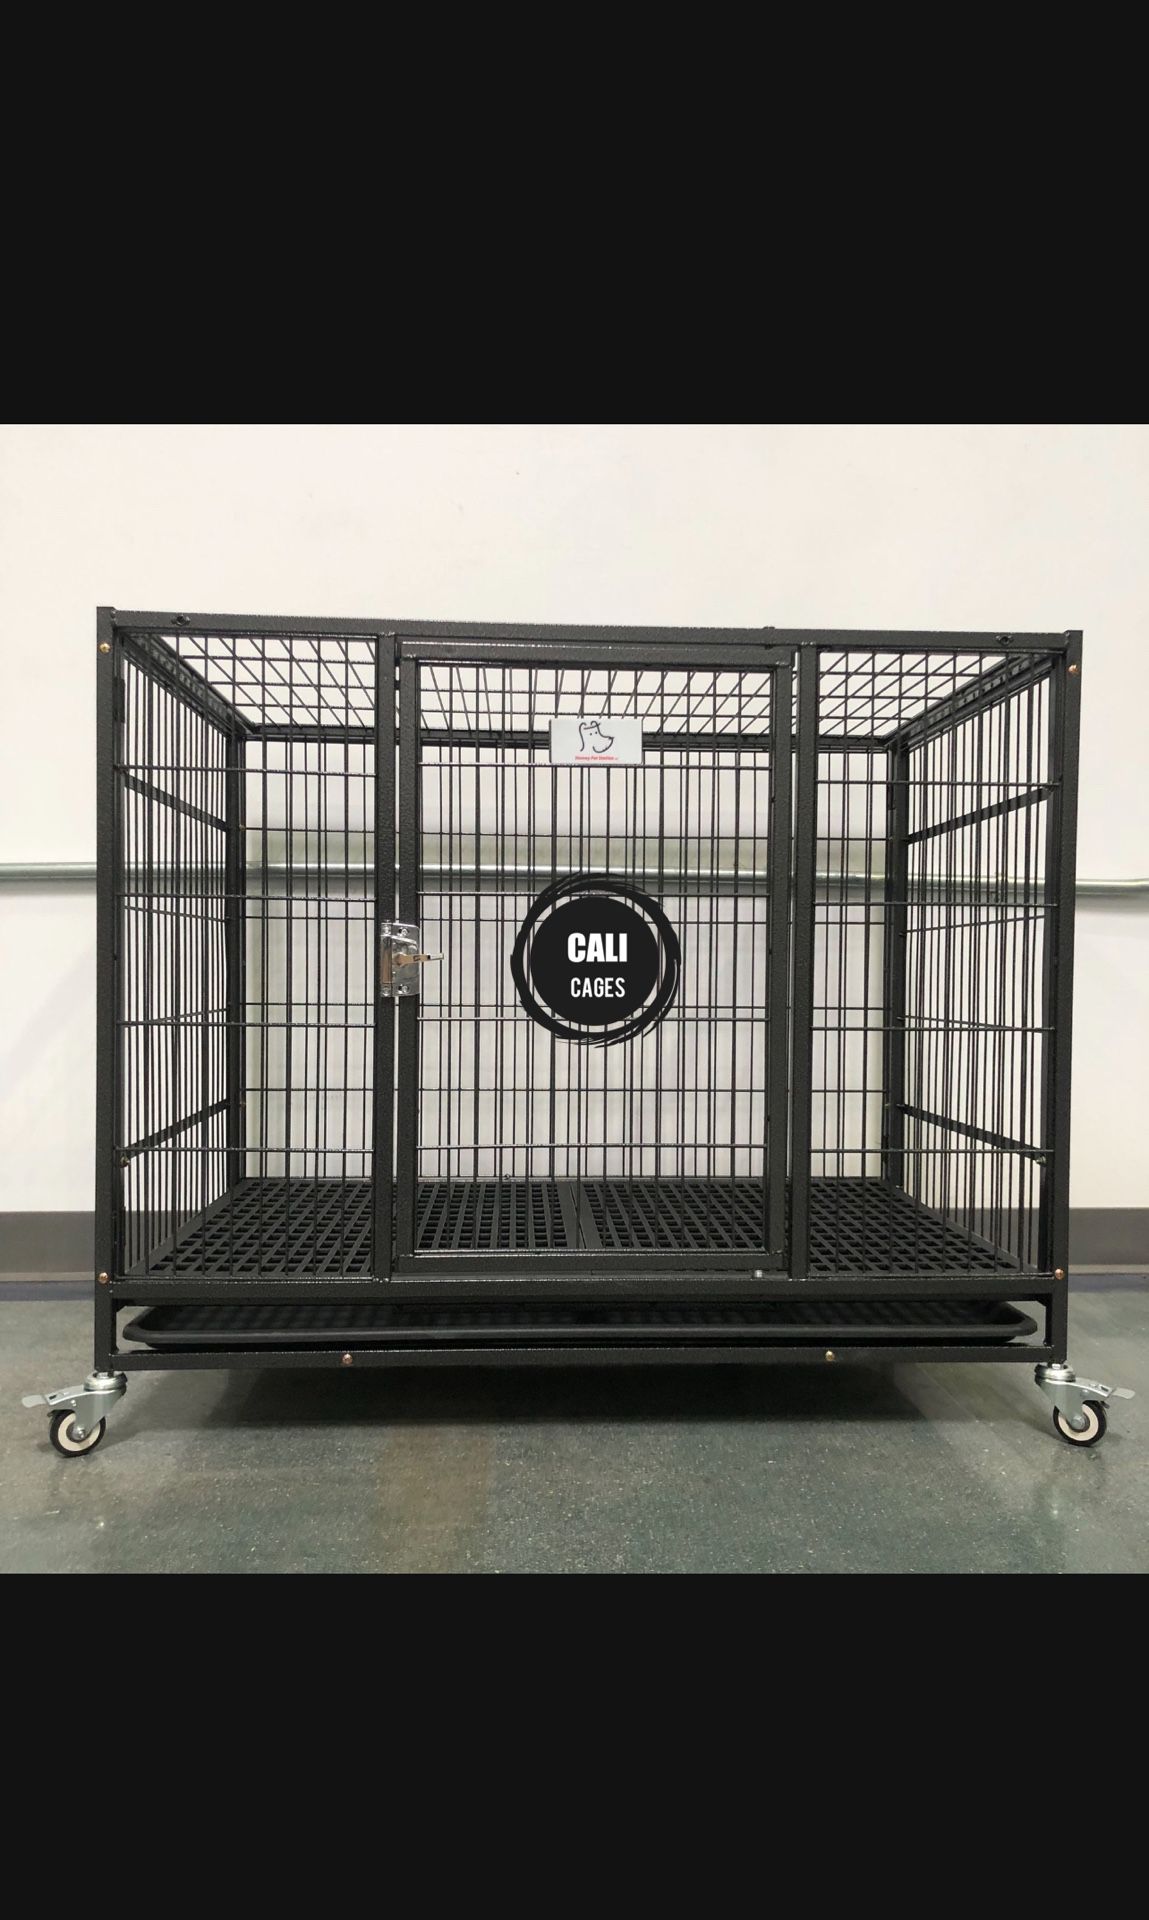 Dog Cage Kennel Size 37” Medium With Plastic Floor Grid Trays And Wheels New In Box 📦 